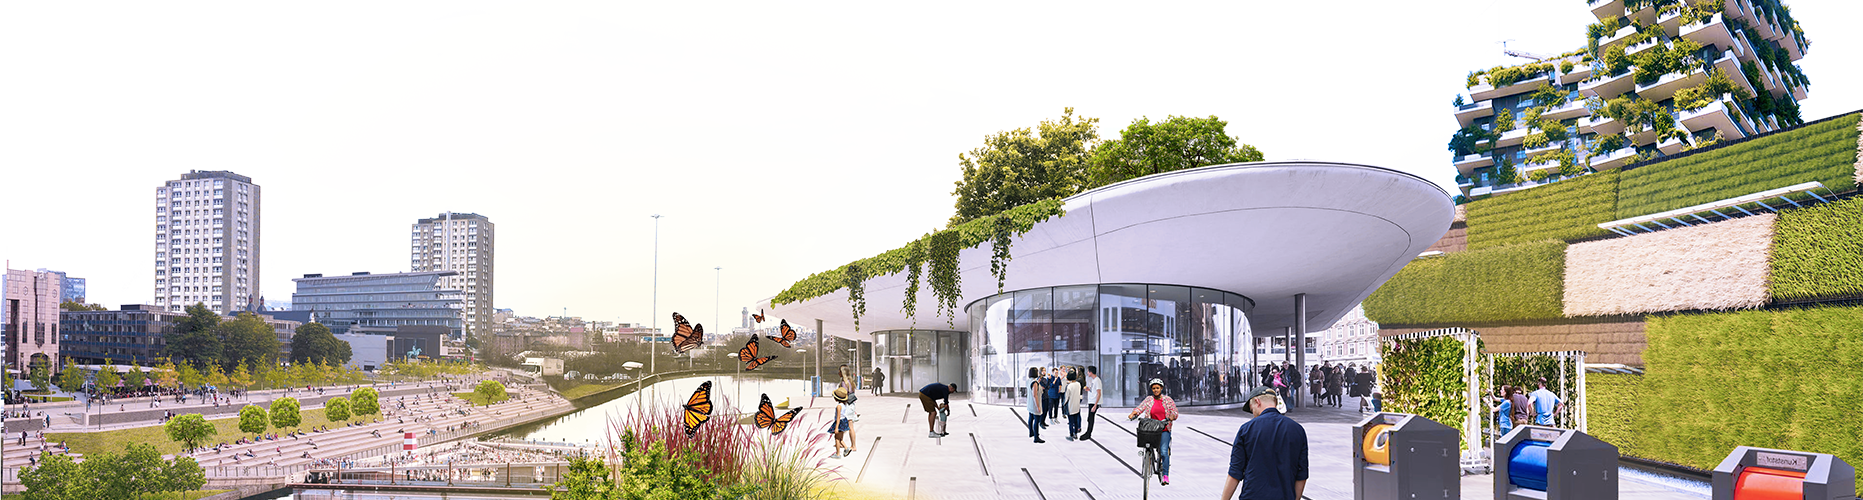 Postcard from the Future (image : Studio for New Realties) > imaging a Centre Centre with a nature network of green-blue open spaces for communities to enjoy